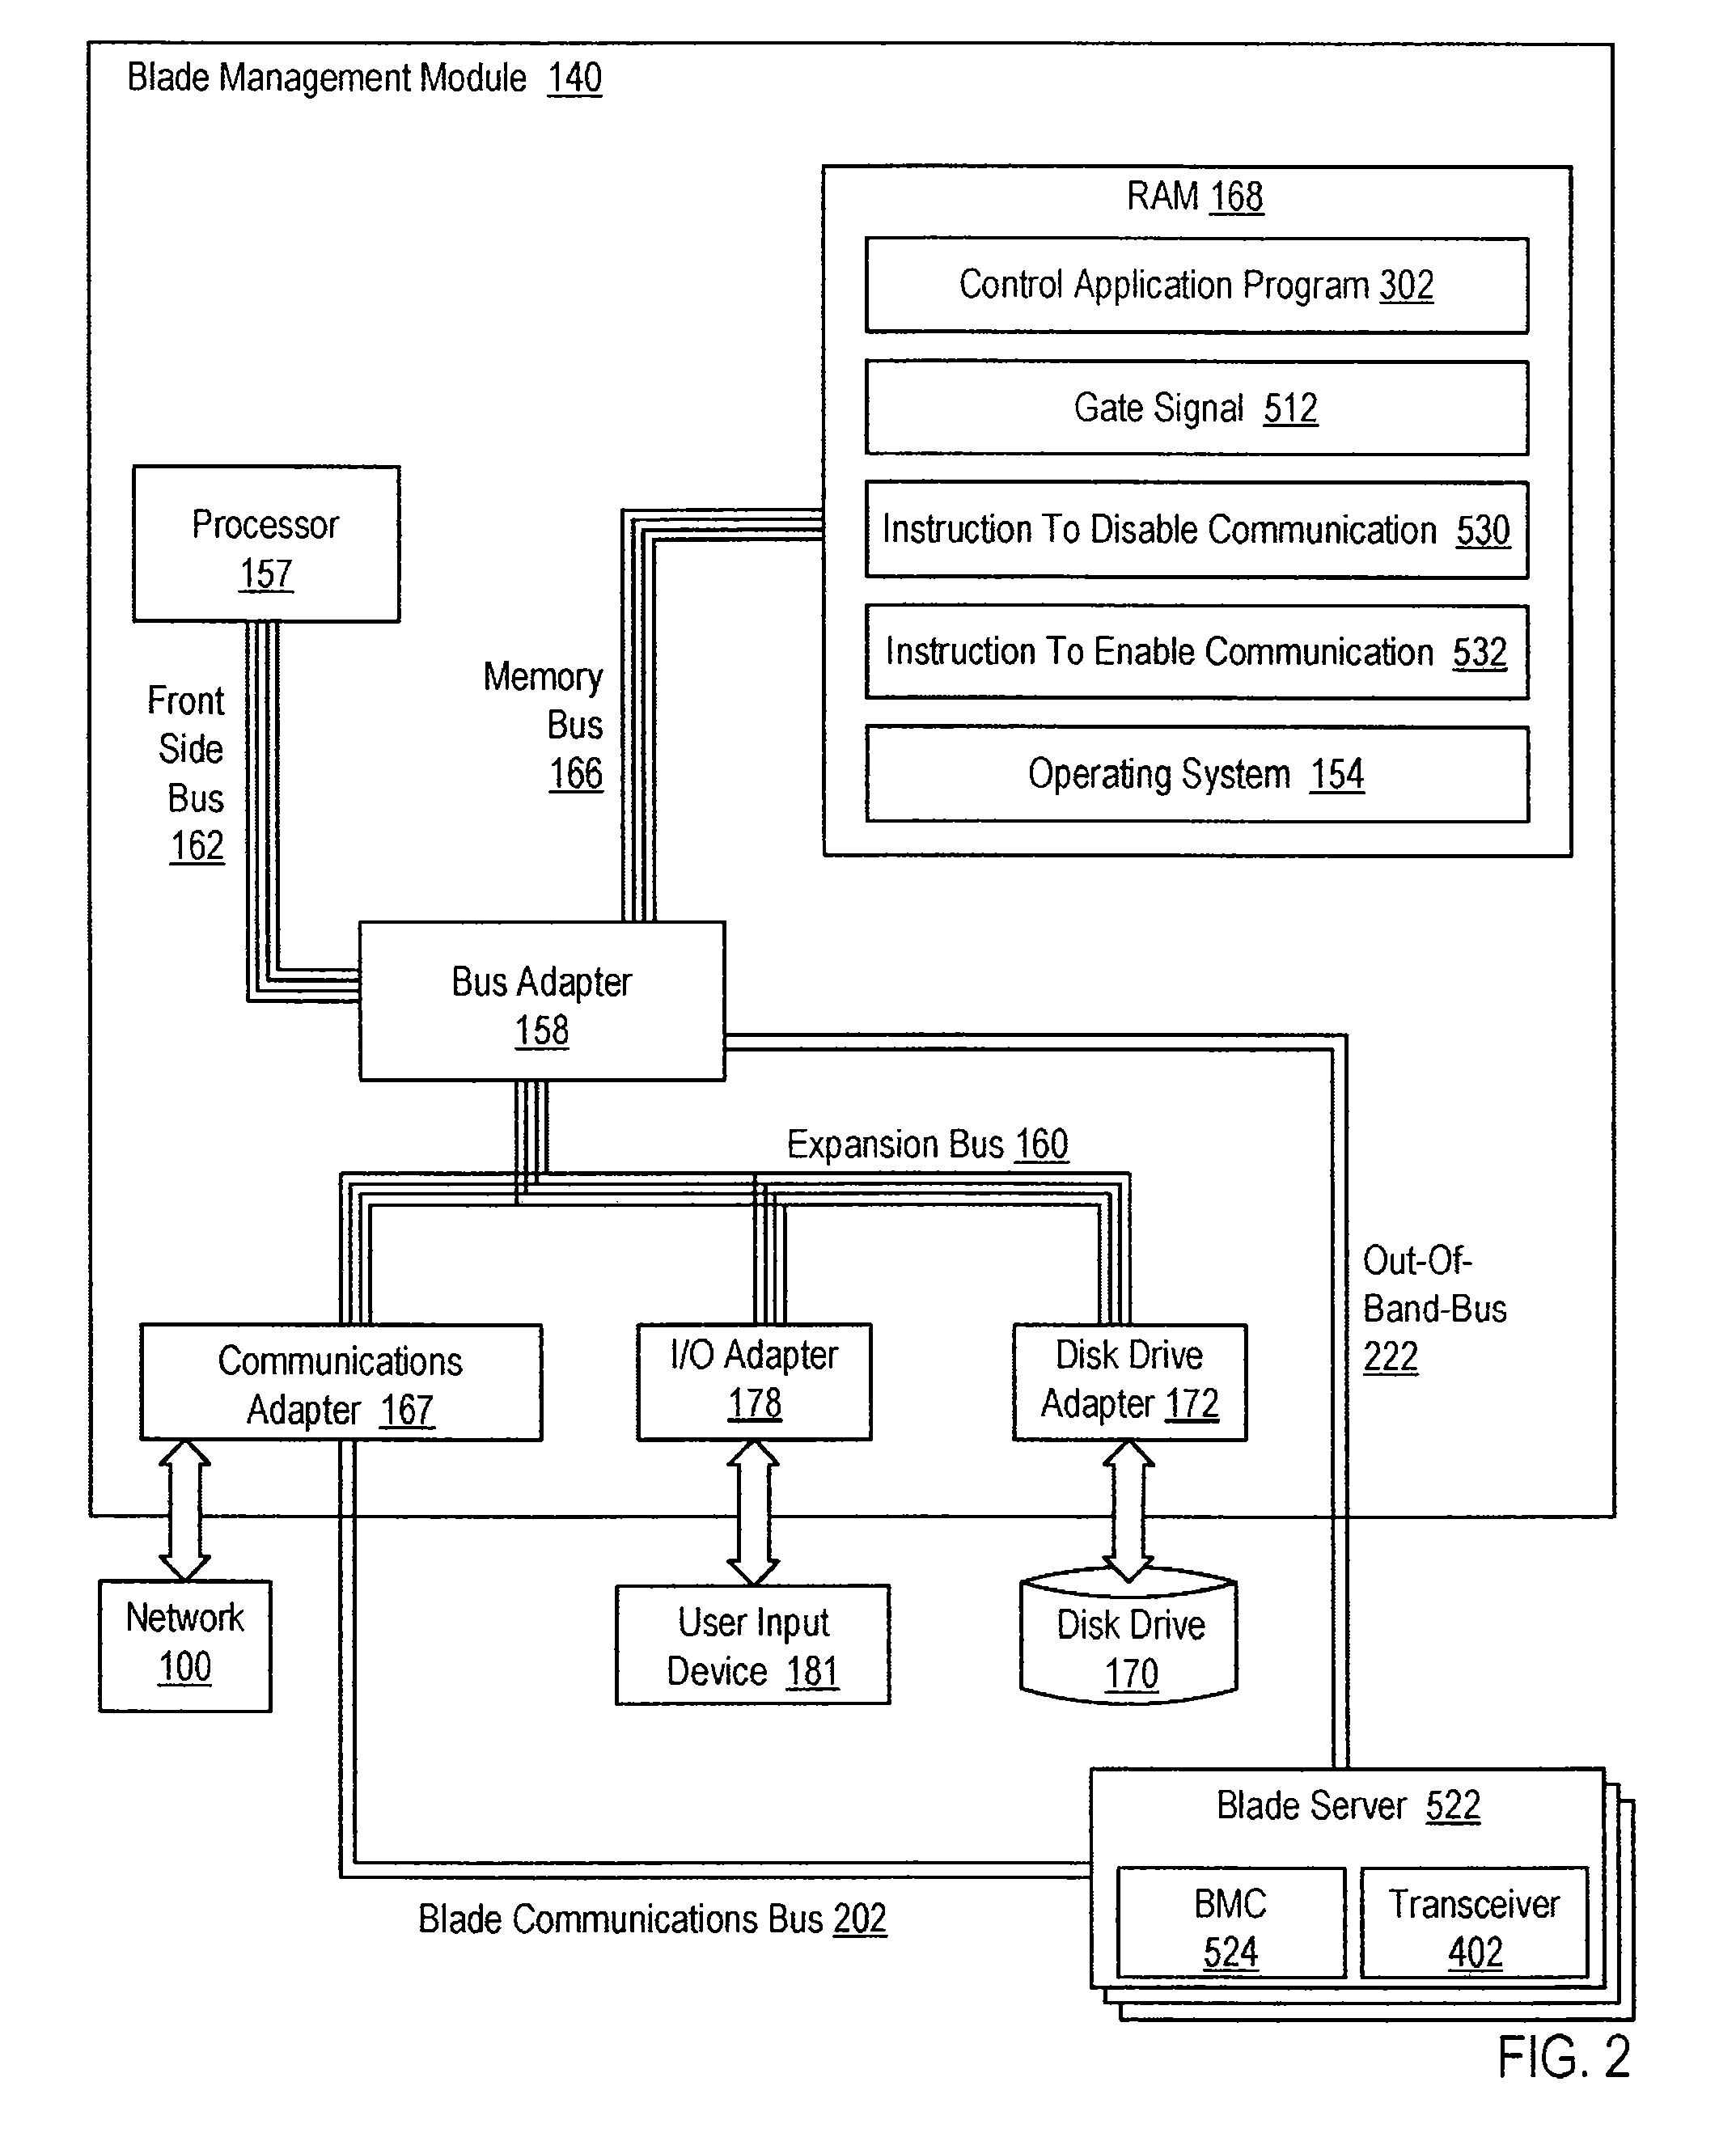 Structure for resetting a hypertransport link in a blade server